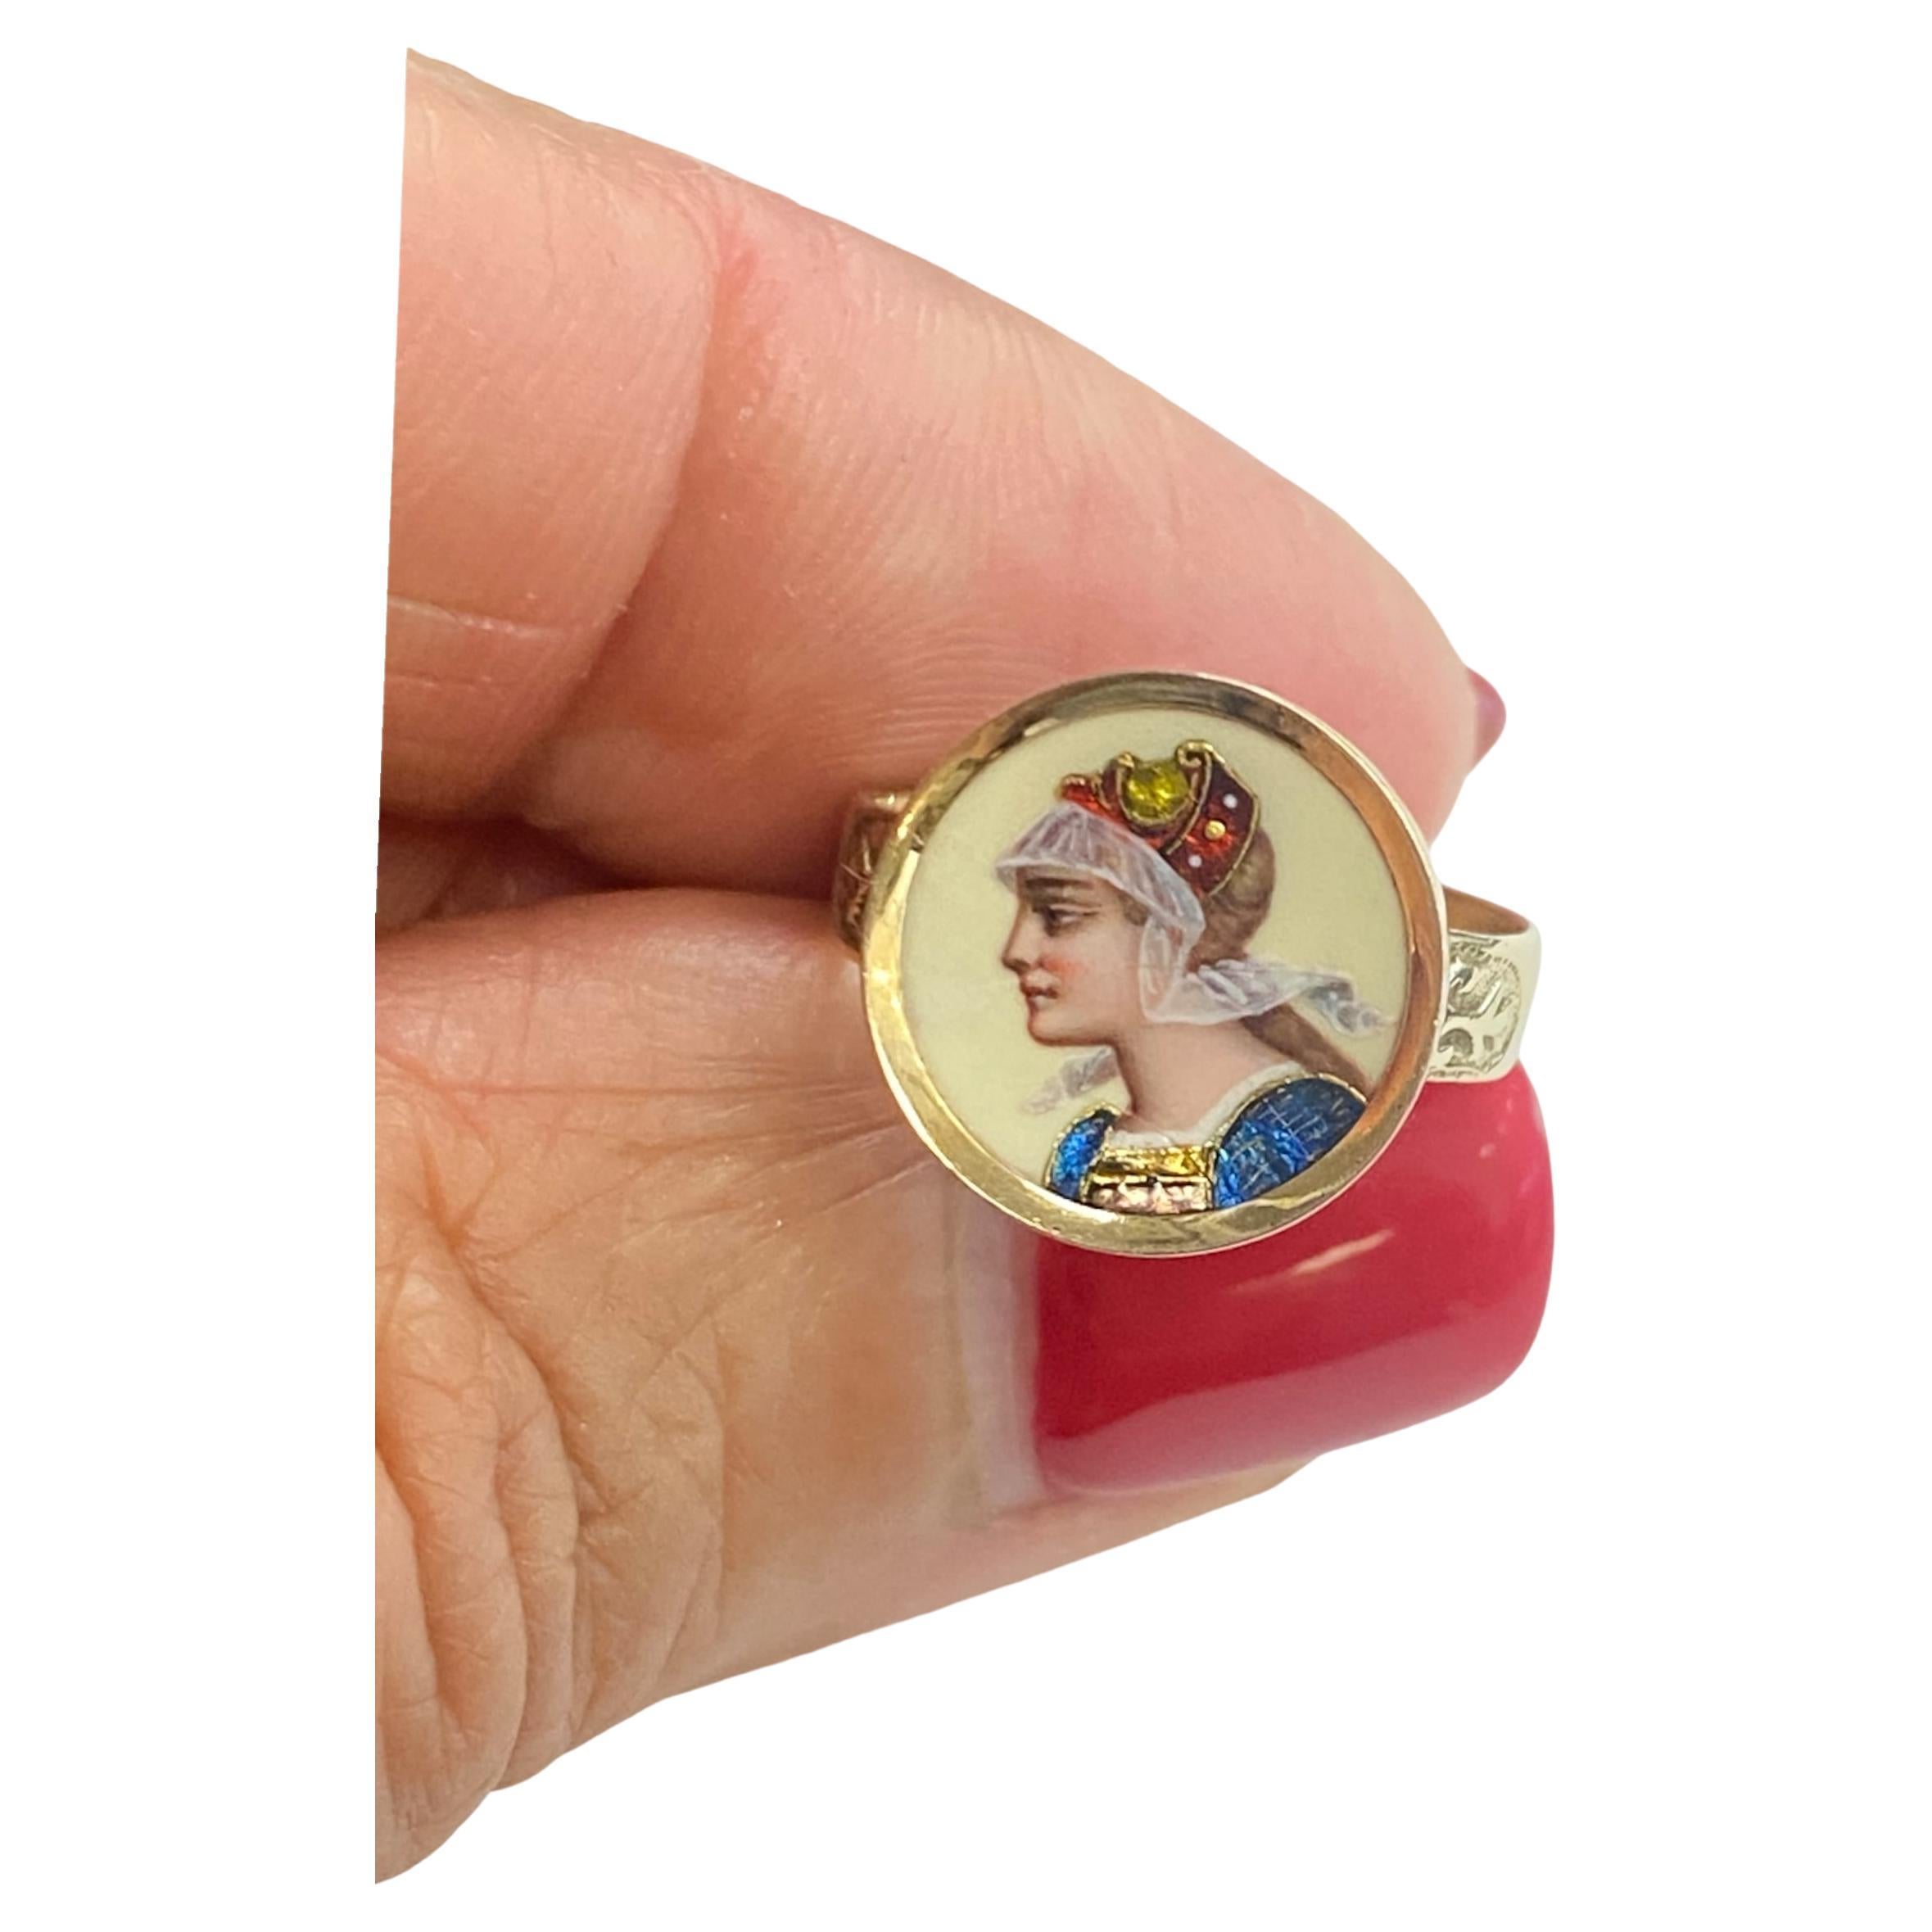 Hand Painted Renaissance cameo is a bezel set in a 14-karat yellow gold ring. The cameo is distinguished with brilliant colors and flicker of color, giving it a rich and unique finish. The total diameter of the ring is 13.60 mm, and the shank